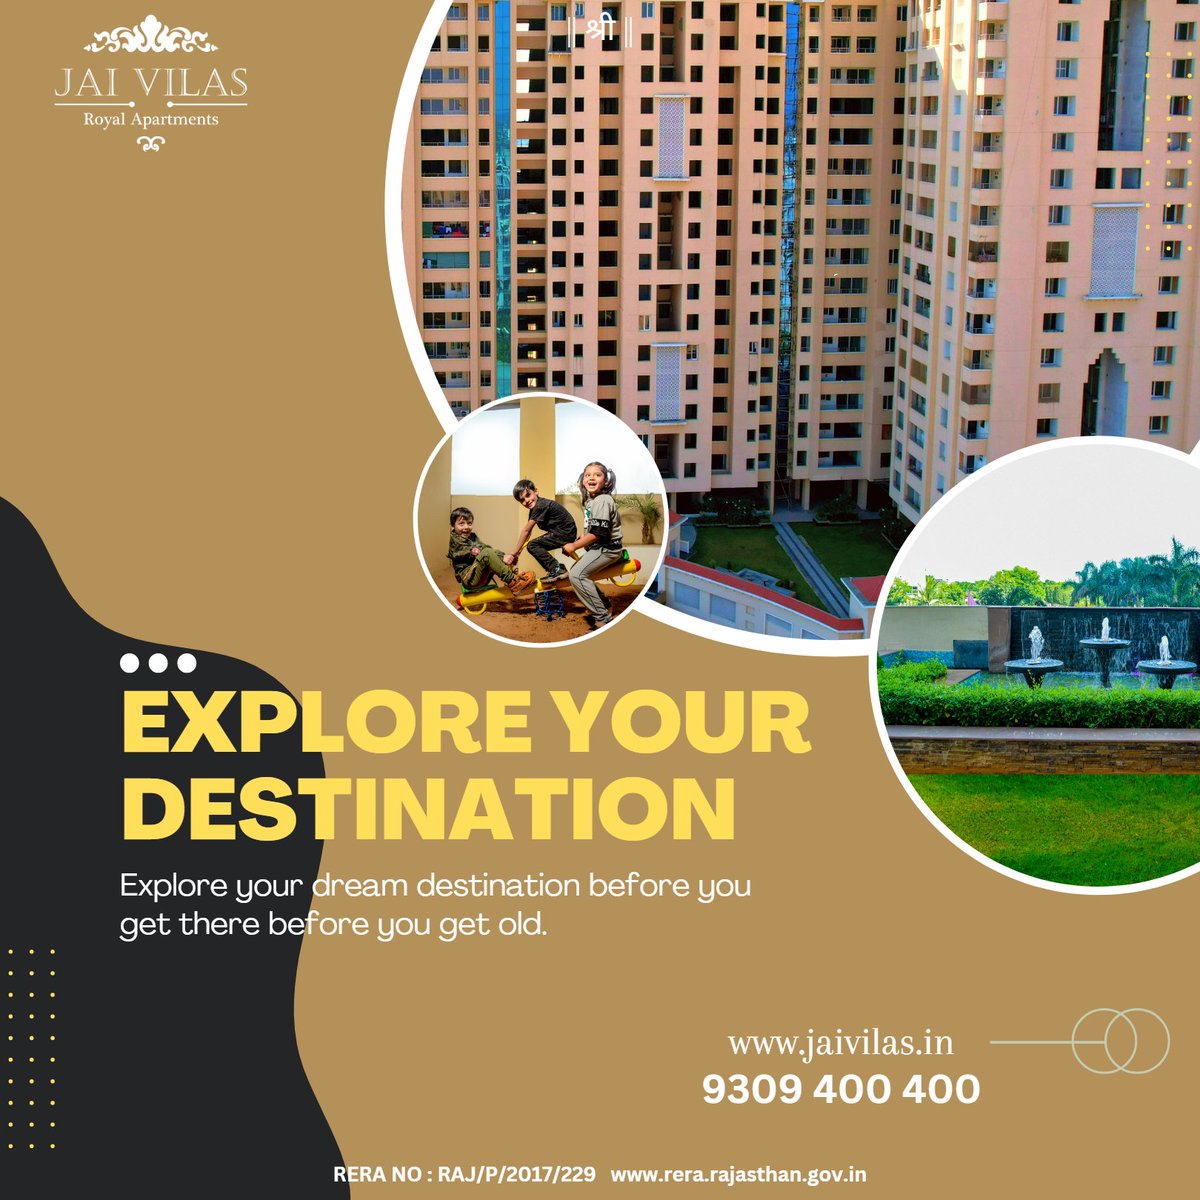 Make Your Dreams a Reality Call us at +91-9309400400 Visit- jaivilas.in
#therealtyproject #trp #realtyproject #realtyindia #realtyinvestment #3bhkflats #3bhkflatsforsale #3bhkflatsinjaipur #jaipurflats #jaipurflatandvilla #jaipurproperties #propertyforsale